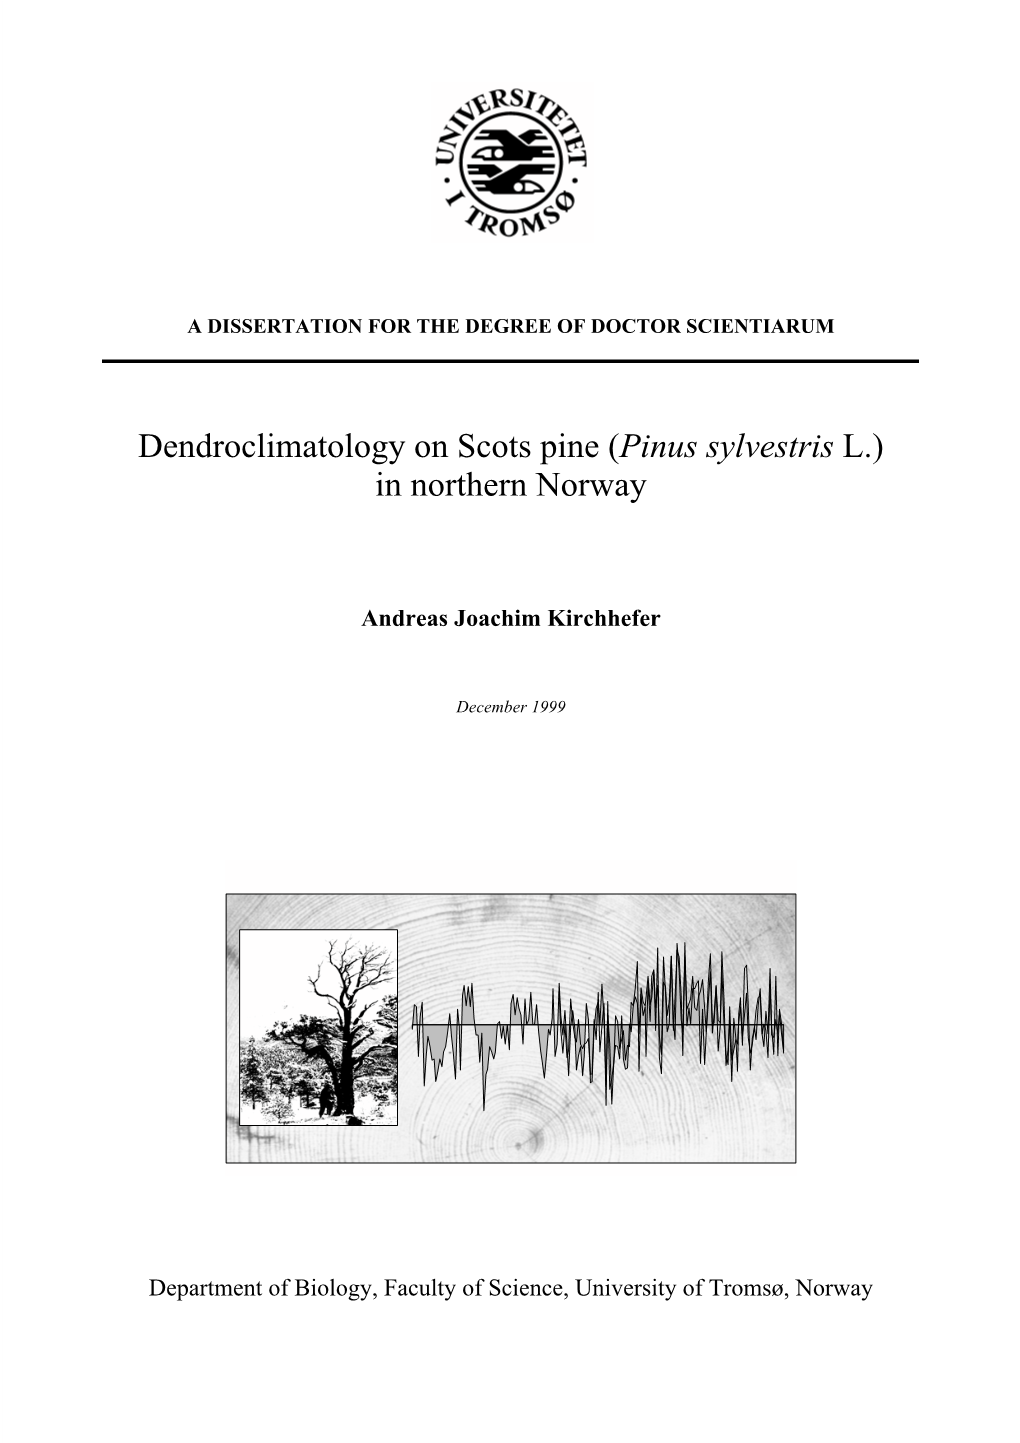 Dendroclimatology on Scots Pine (Pinus Sylvestris L.) in Northern Norway